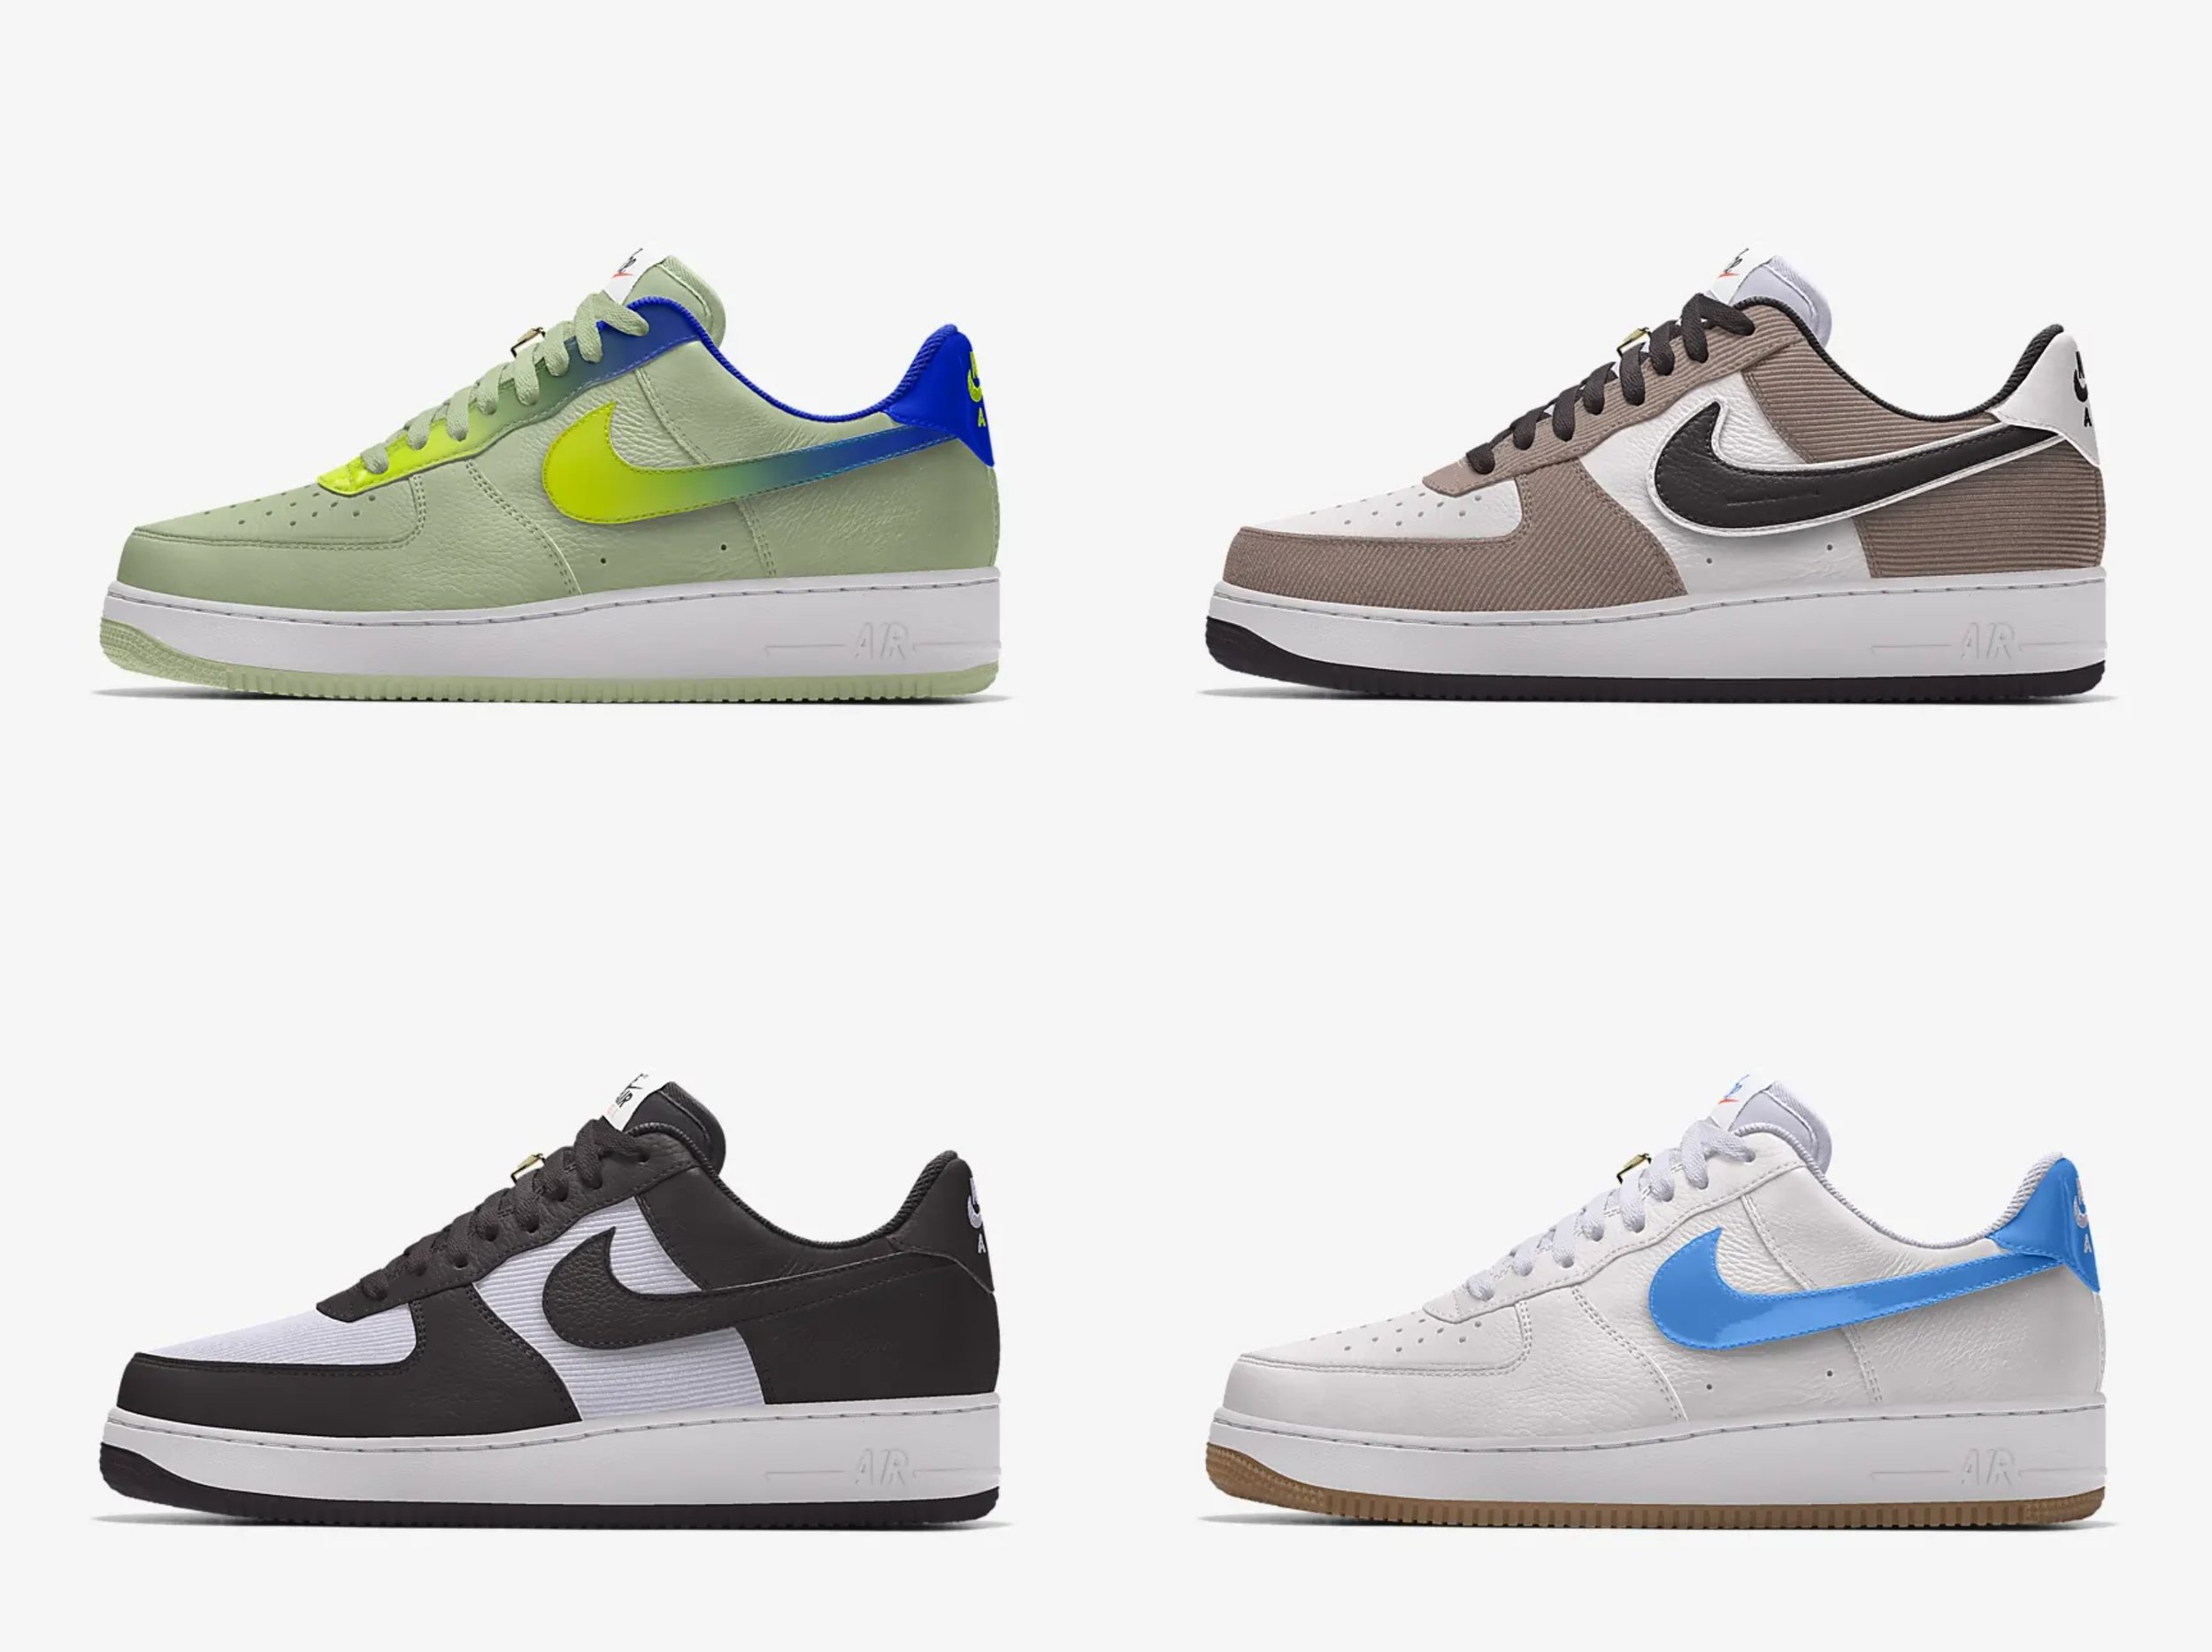 Now Available: Nike Air Force 1 Low Unlocked "By You" — Sneaker Shouts